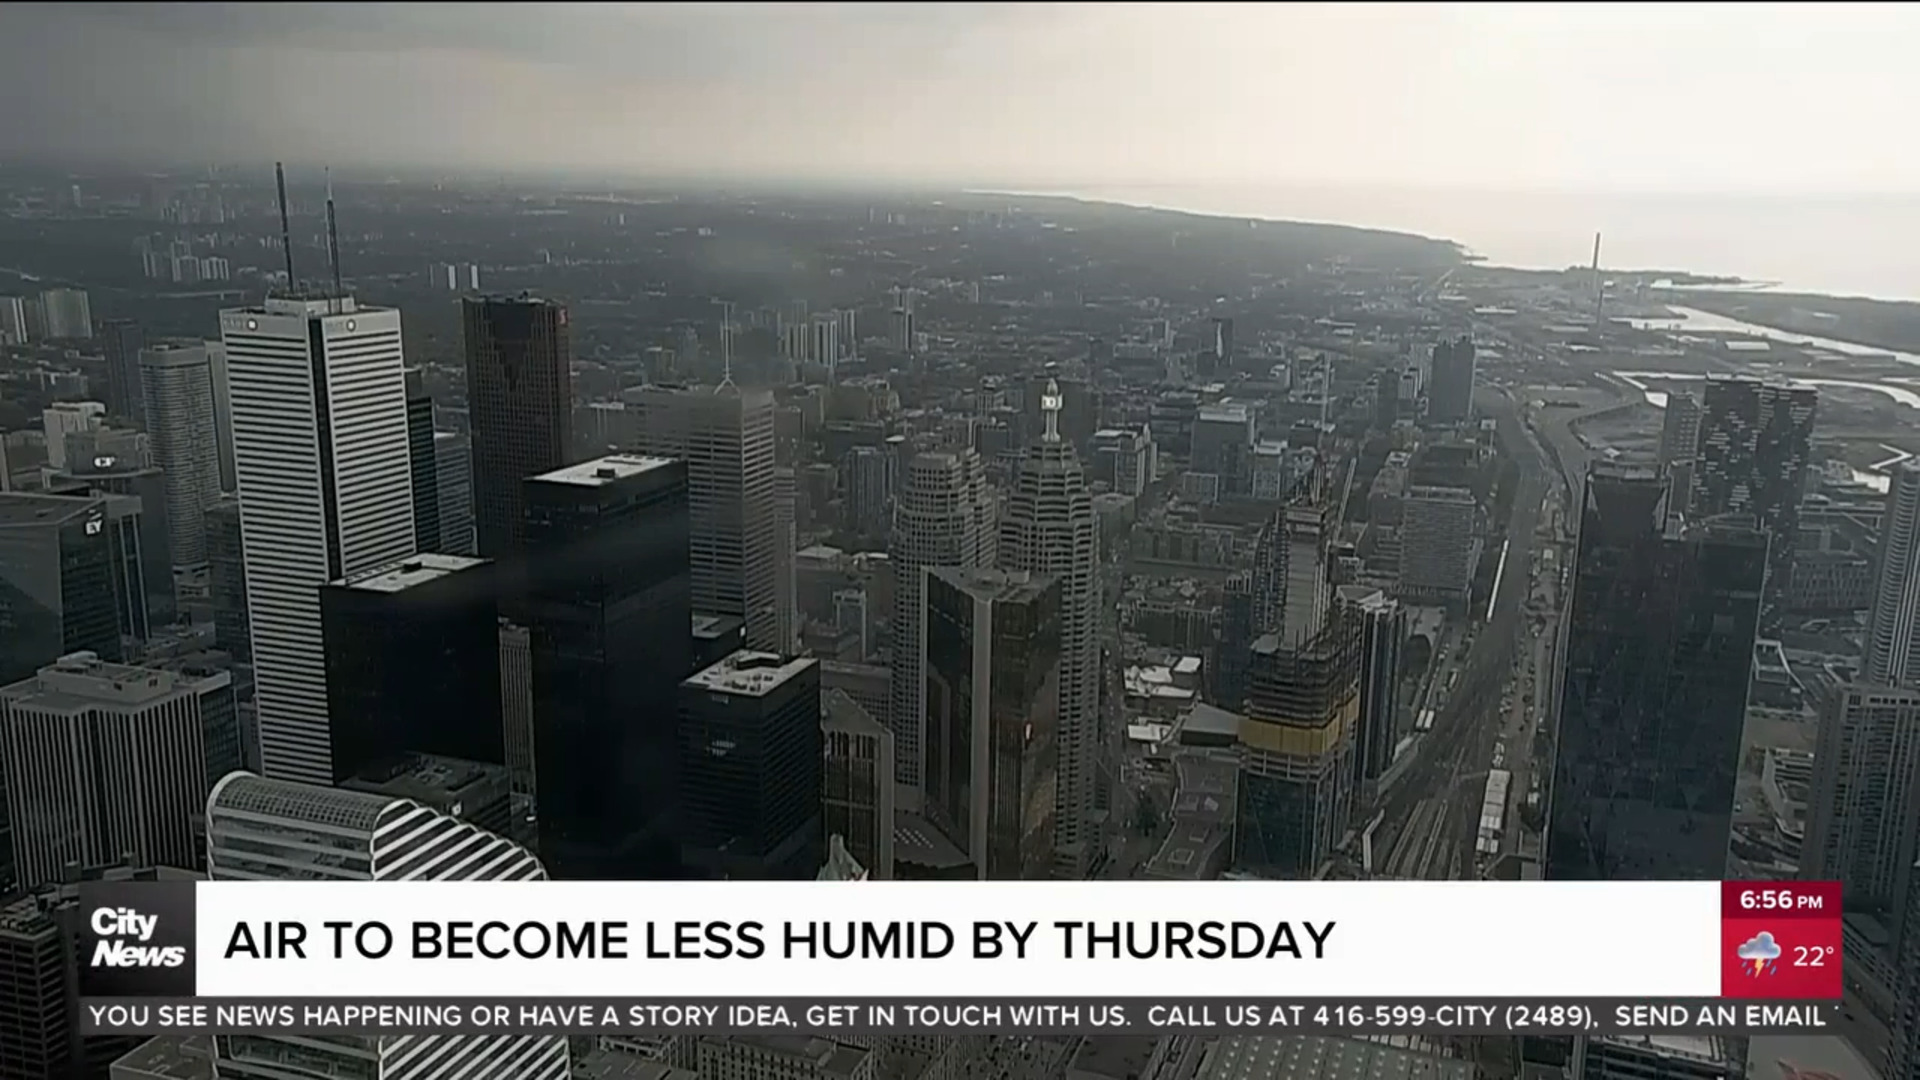 Air in the GTA will become less humid by Thursday